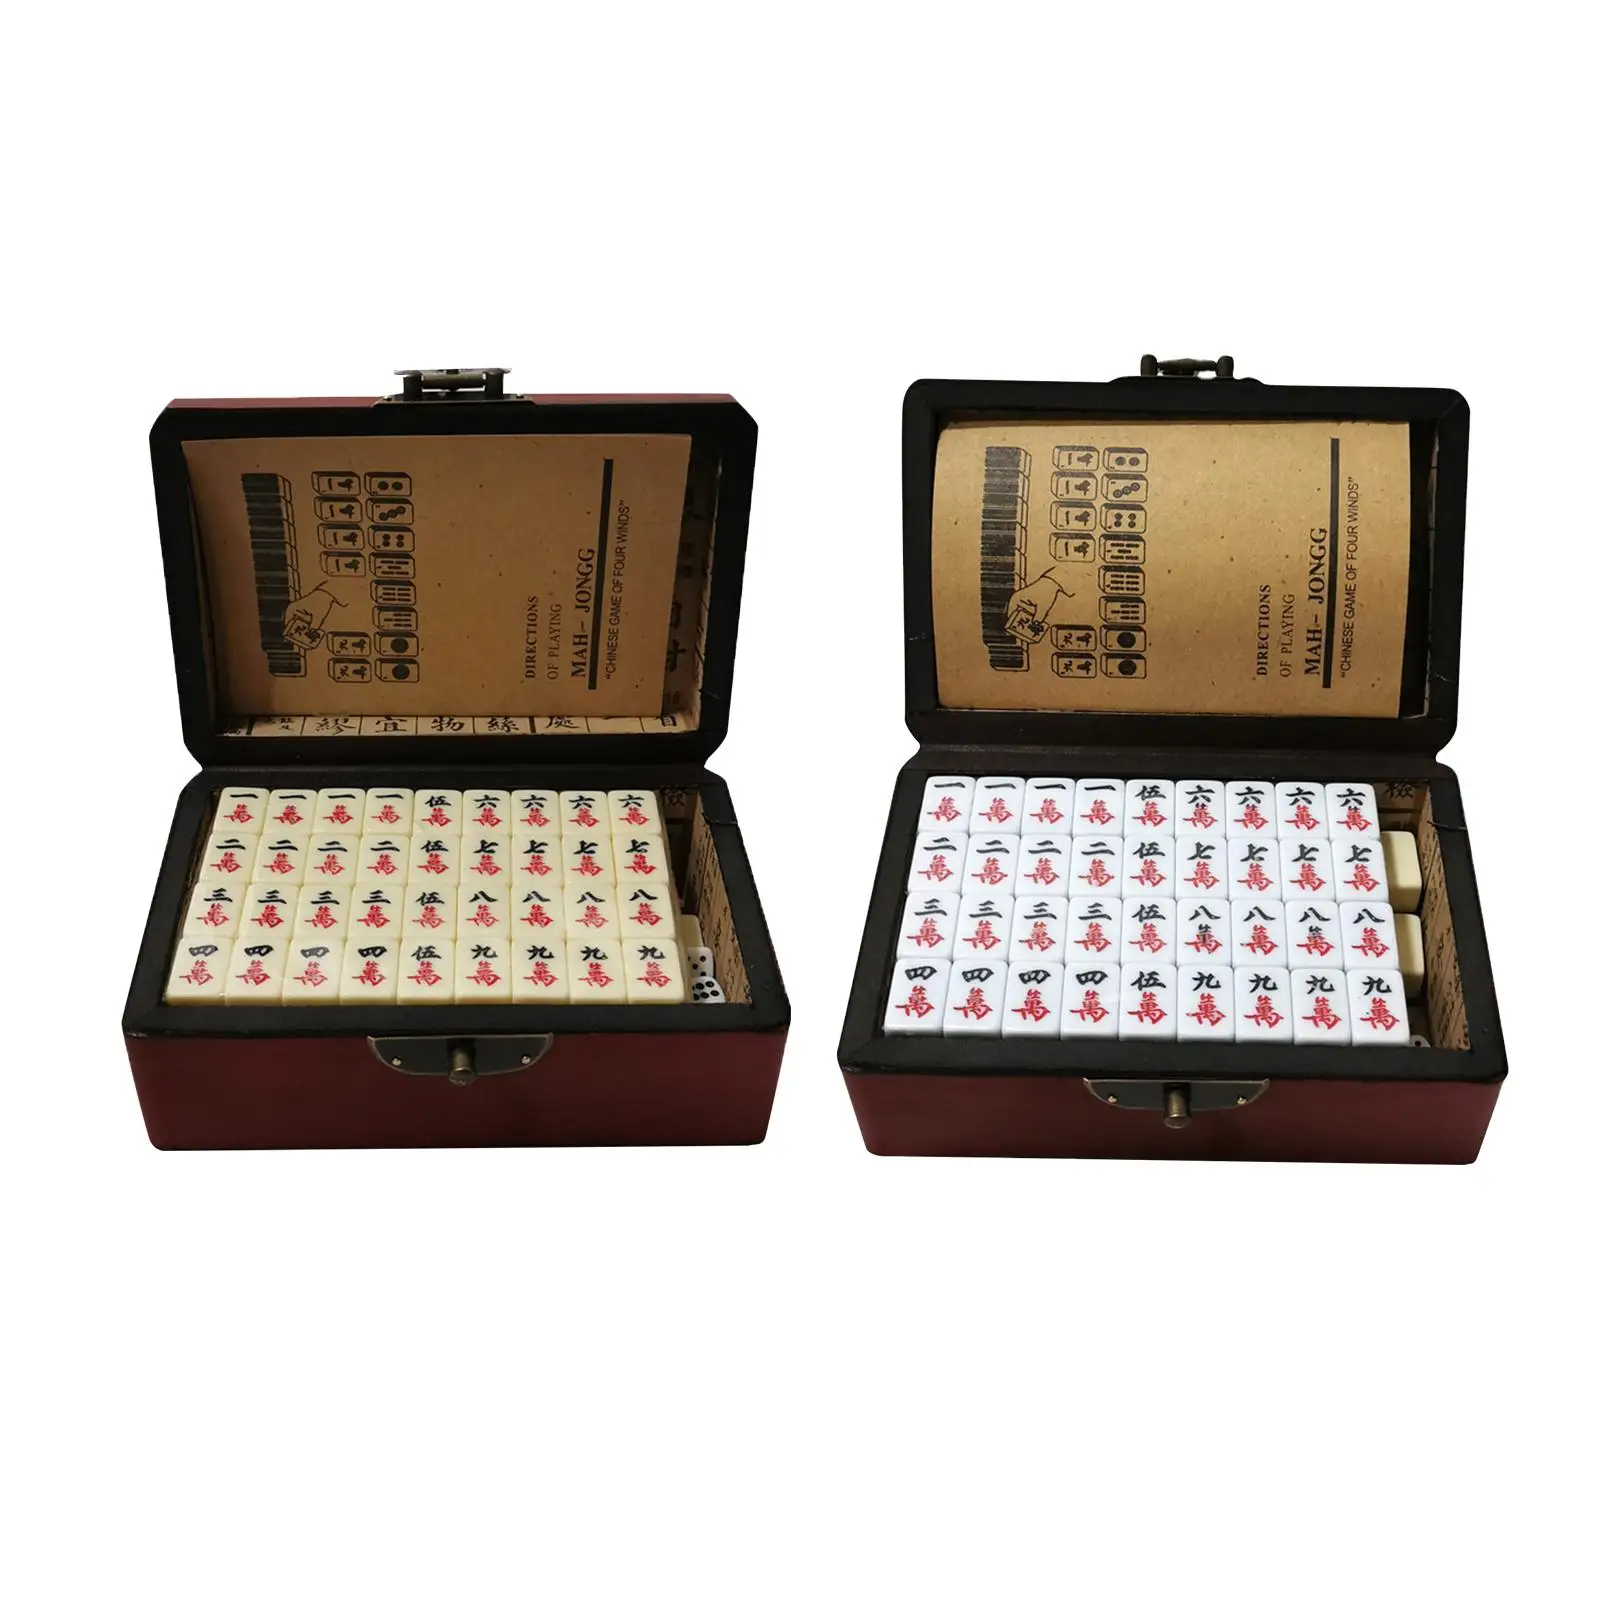 Traditional Chinese Mahjong Set,Leisure Time Game,Family Game,Friends Gathering Game,Board Game for Travel Party Home